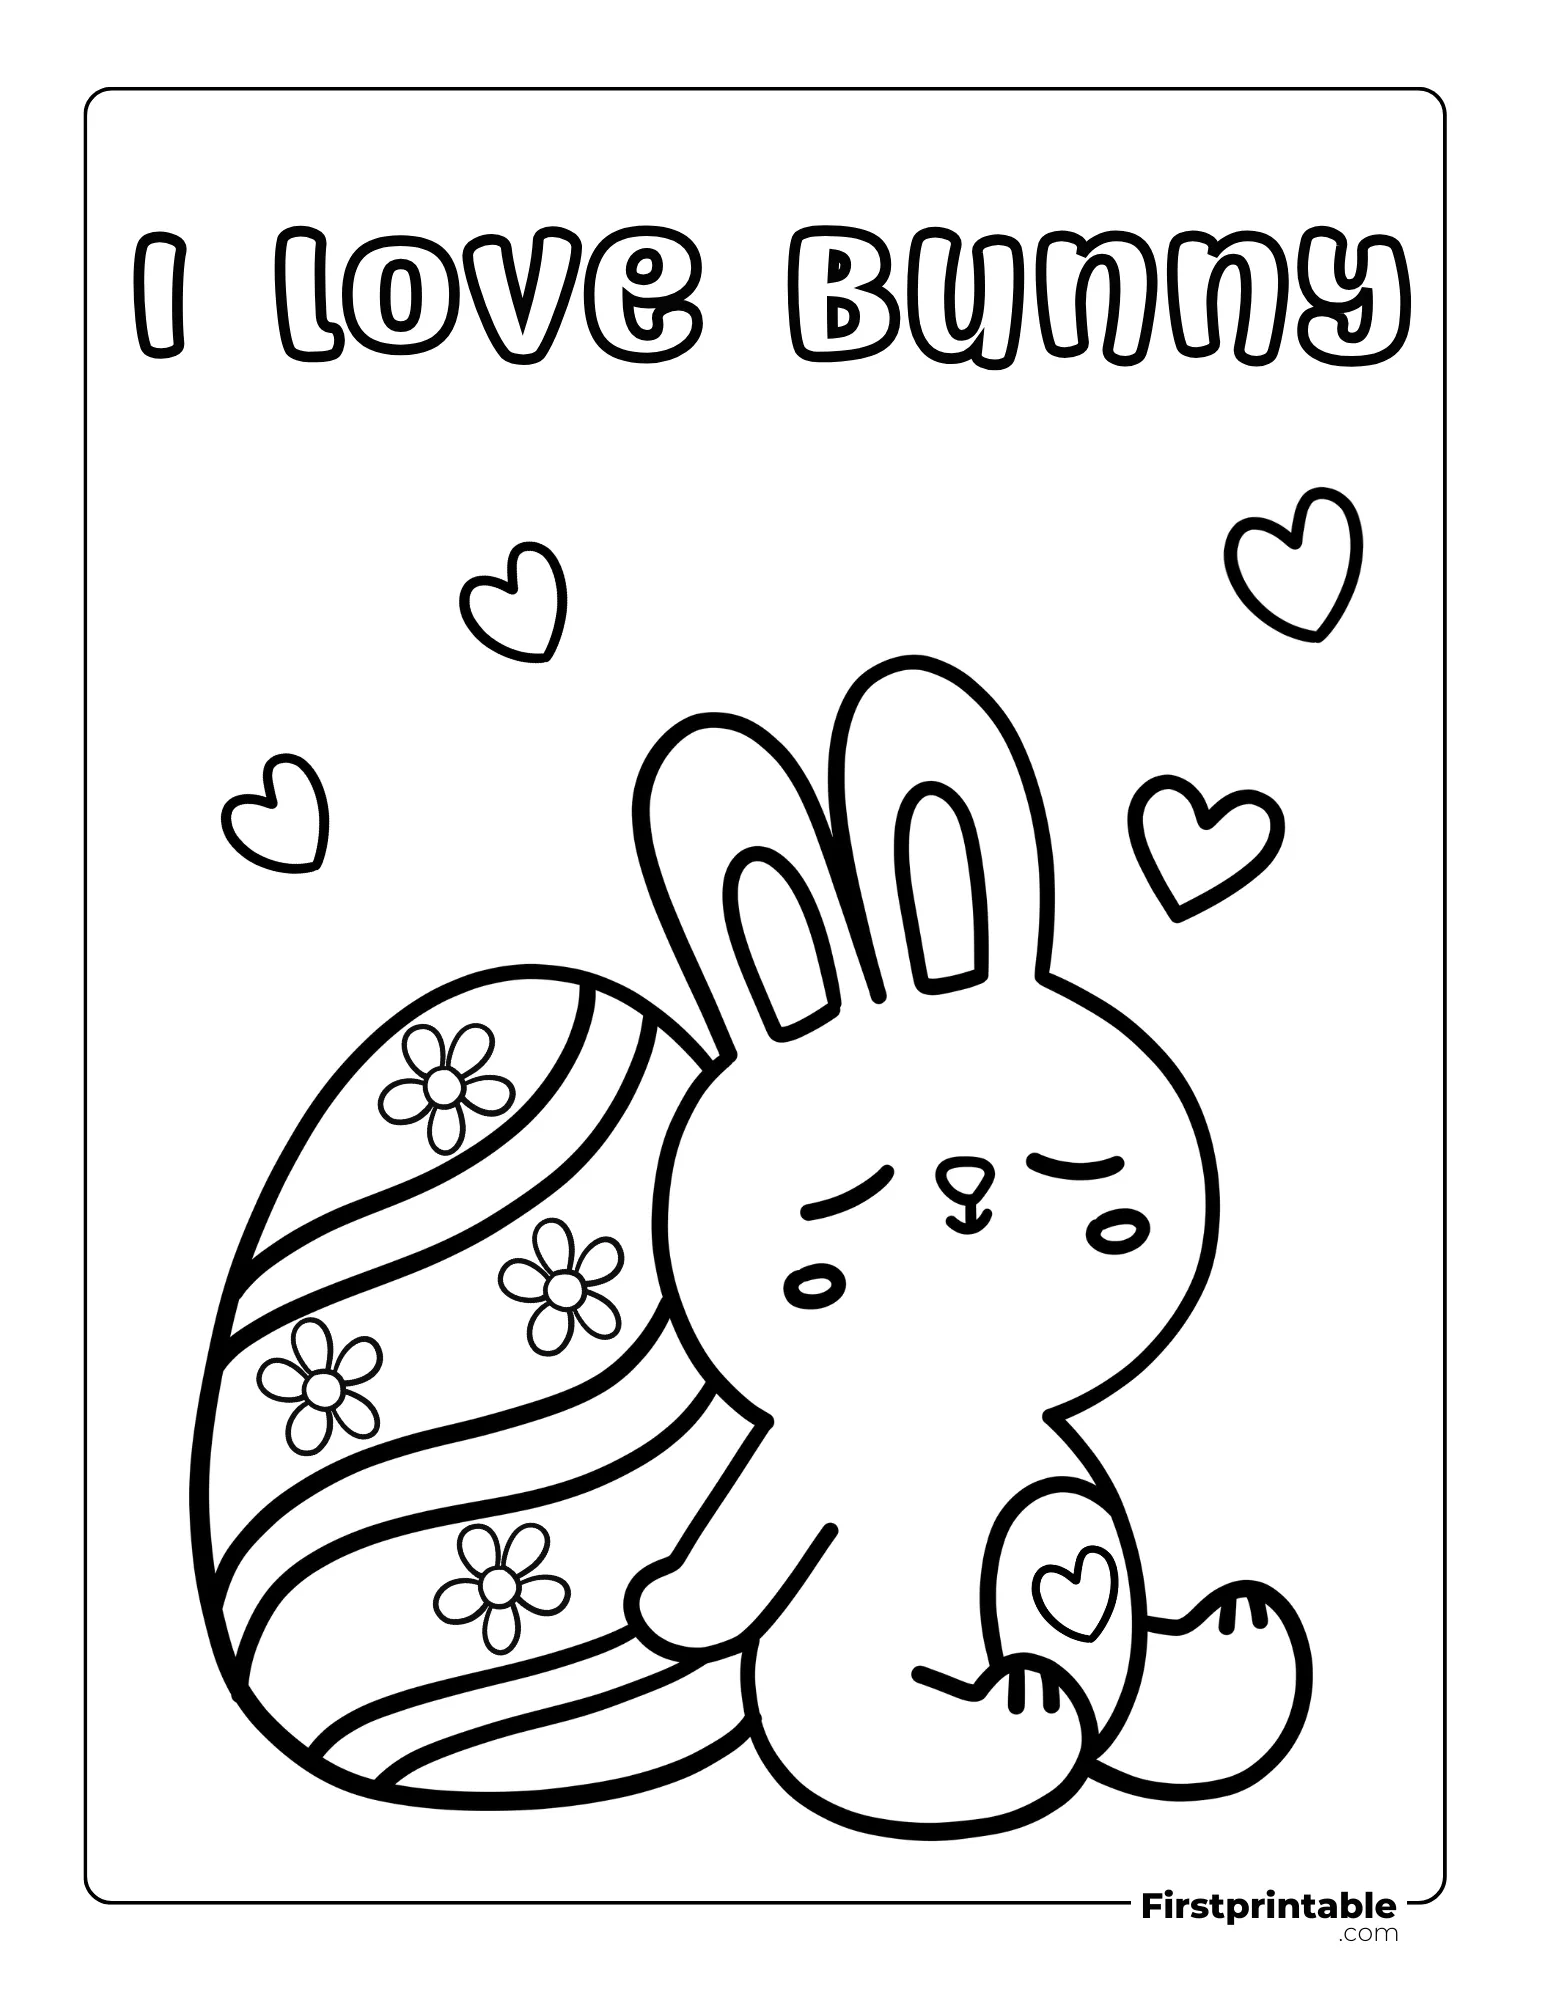 Bunny coloring page for kids